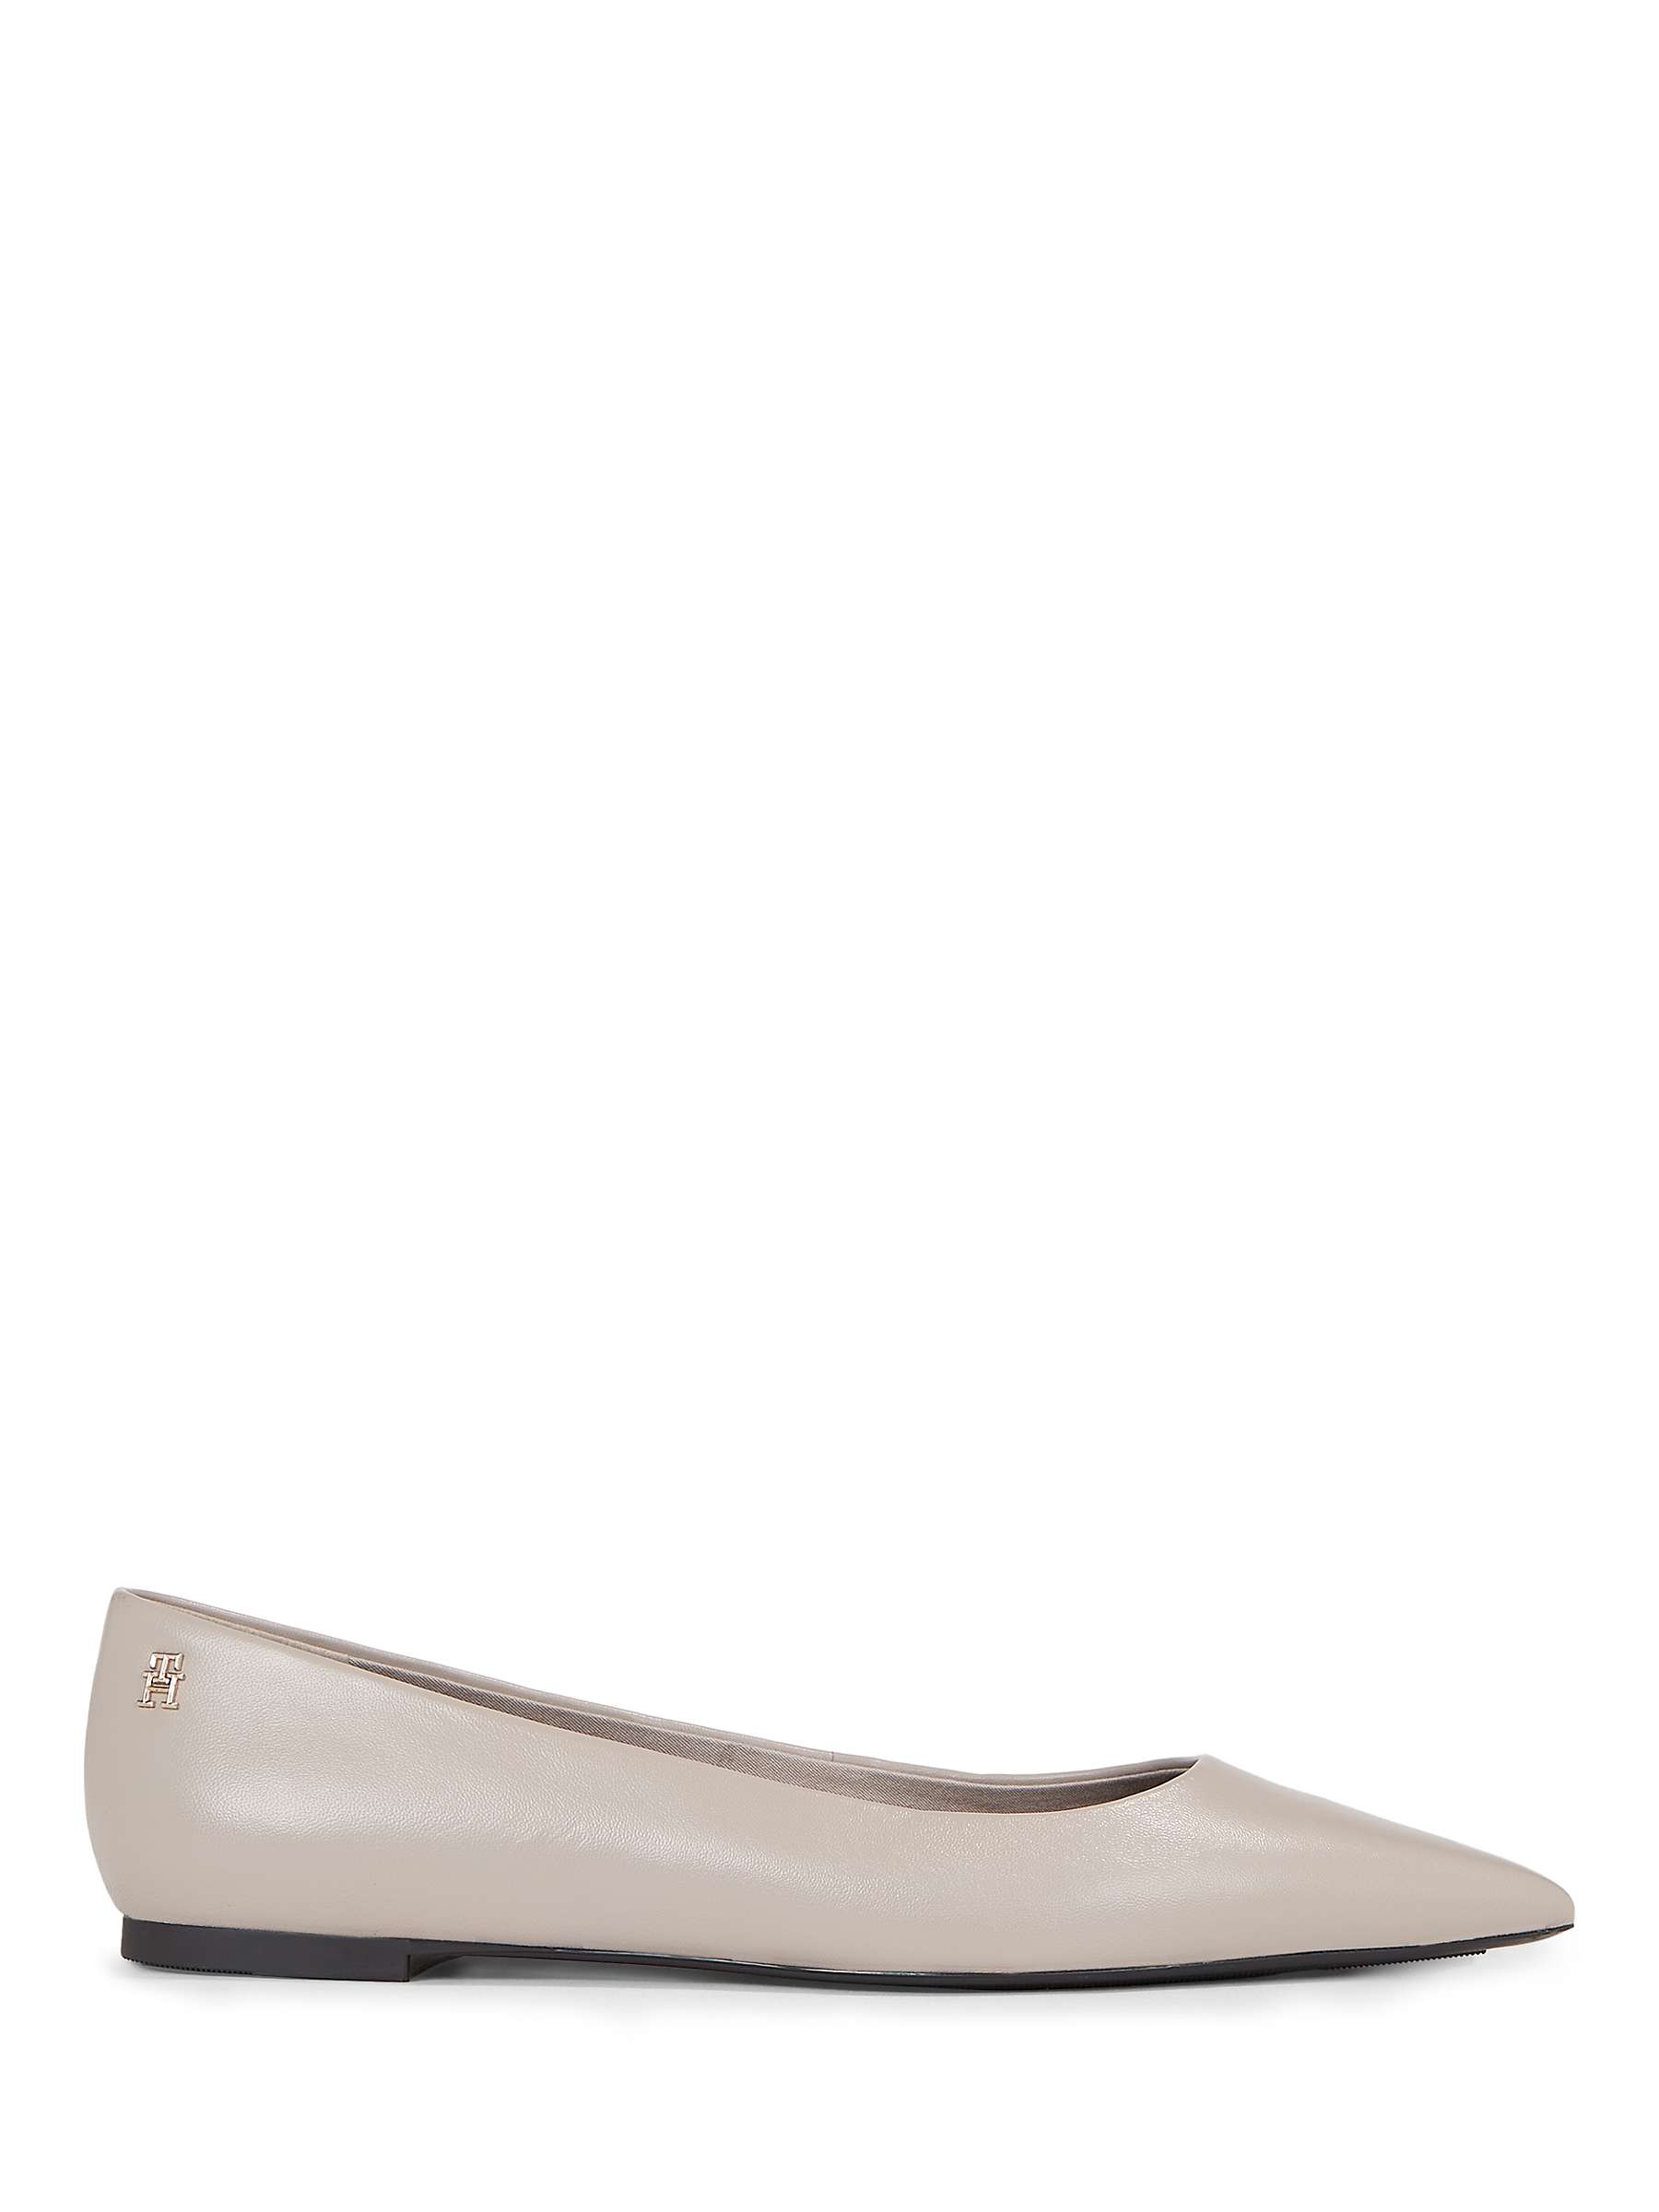 Buy Tommy Hilfiger Essential Pointed Toe Leather Pumps, Smooth Taupe Online at johnlewis.com